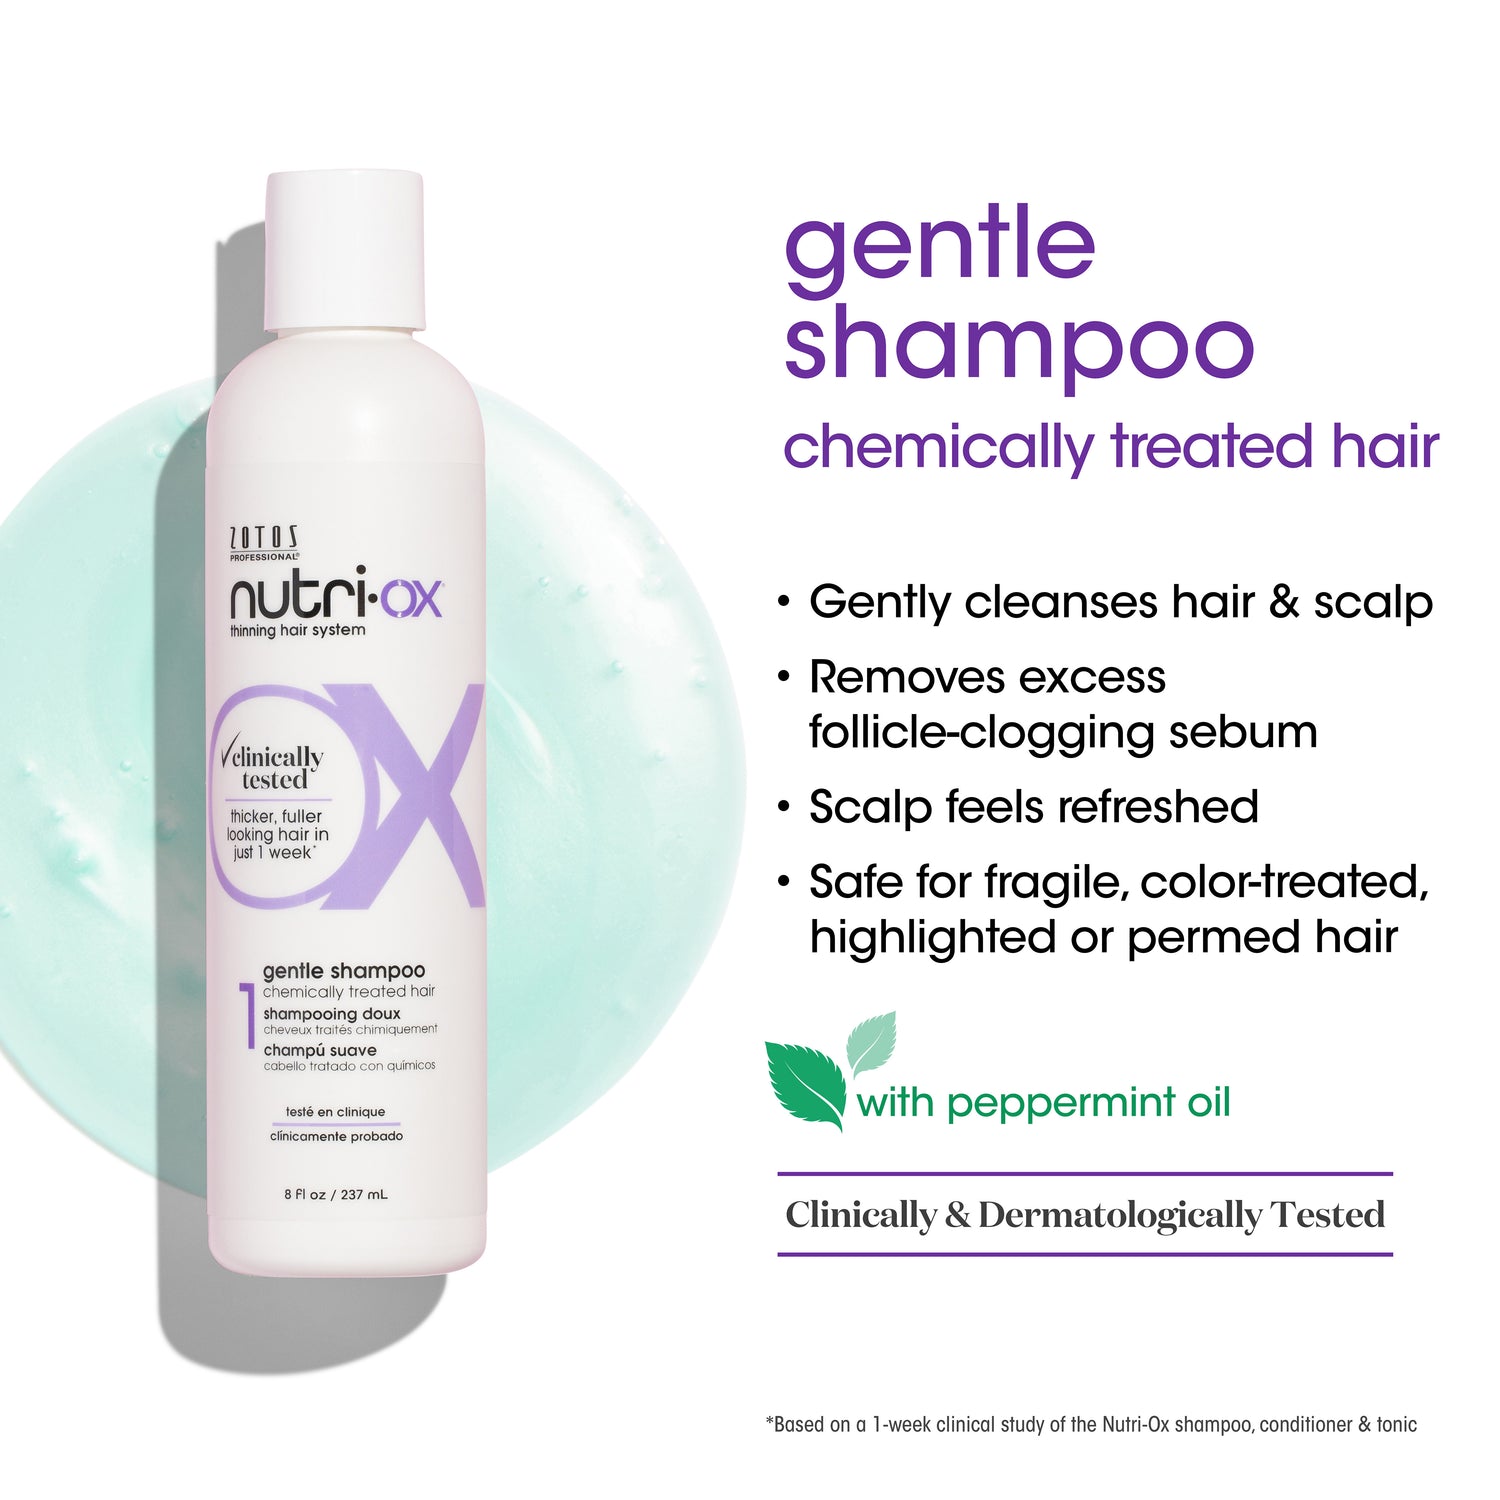 Gentle shampoo for chemically treated hair gently cleanses hair and scalp, removes excess follicle-clogging sebum, and is safe for fragile, color-treated, highlighted, or permed hair,